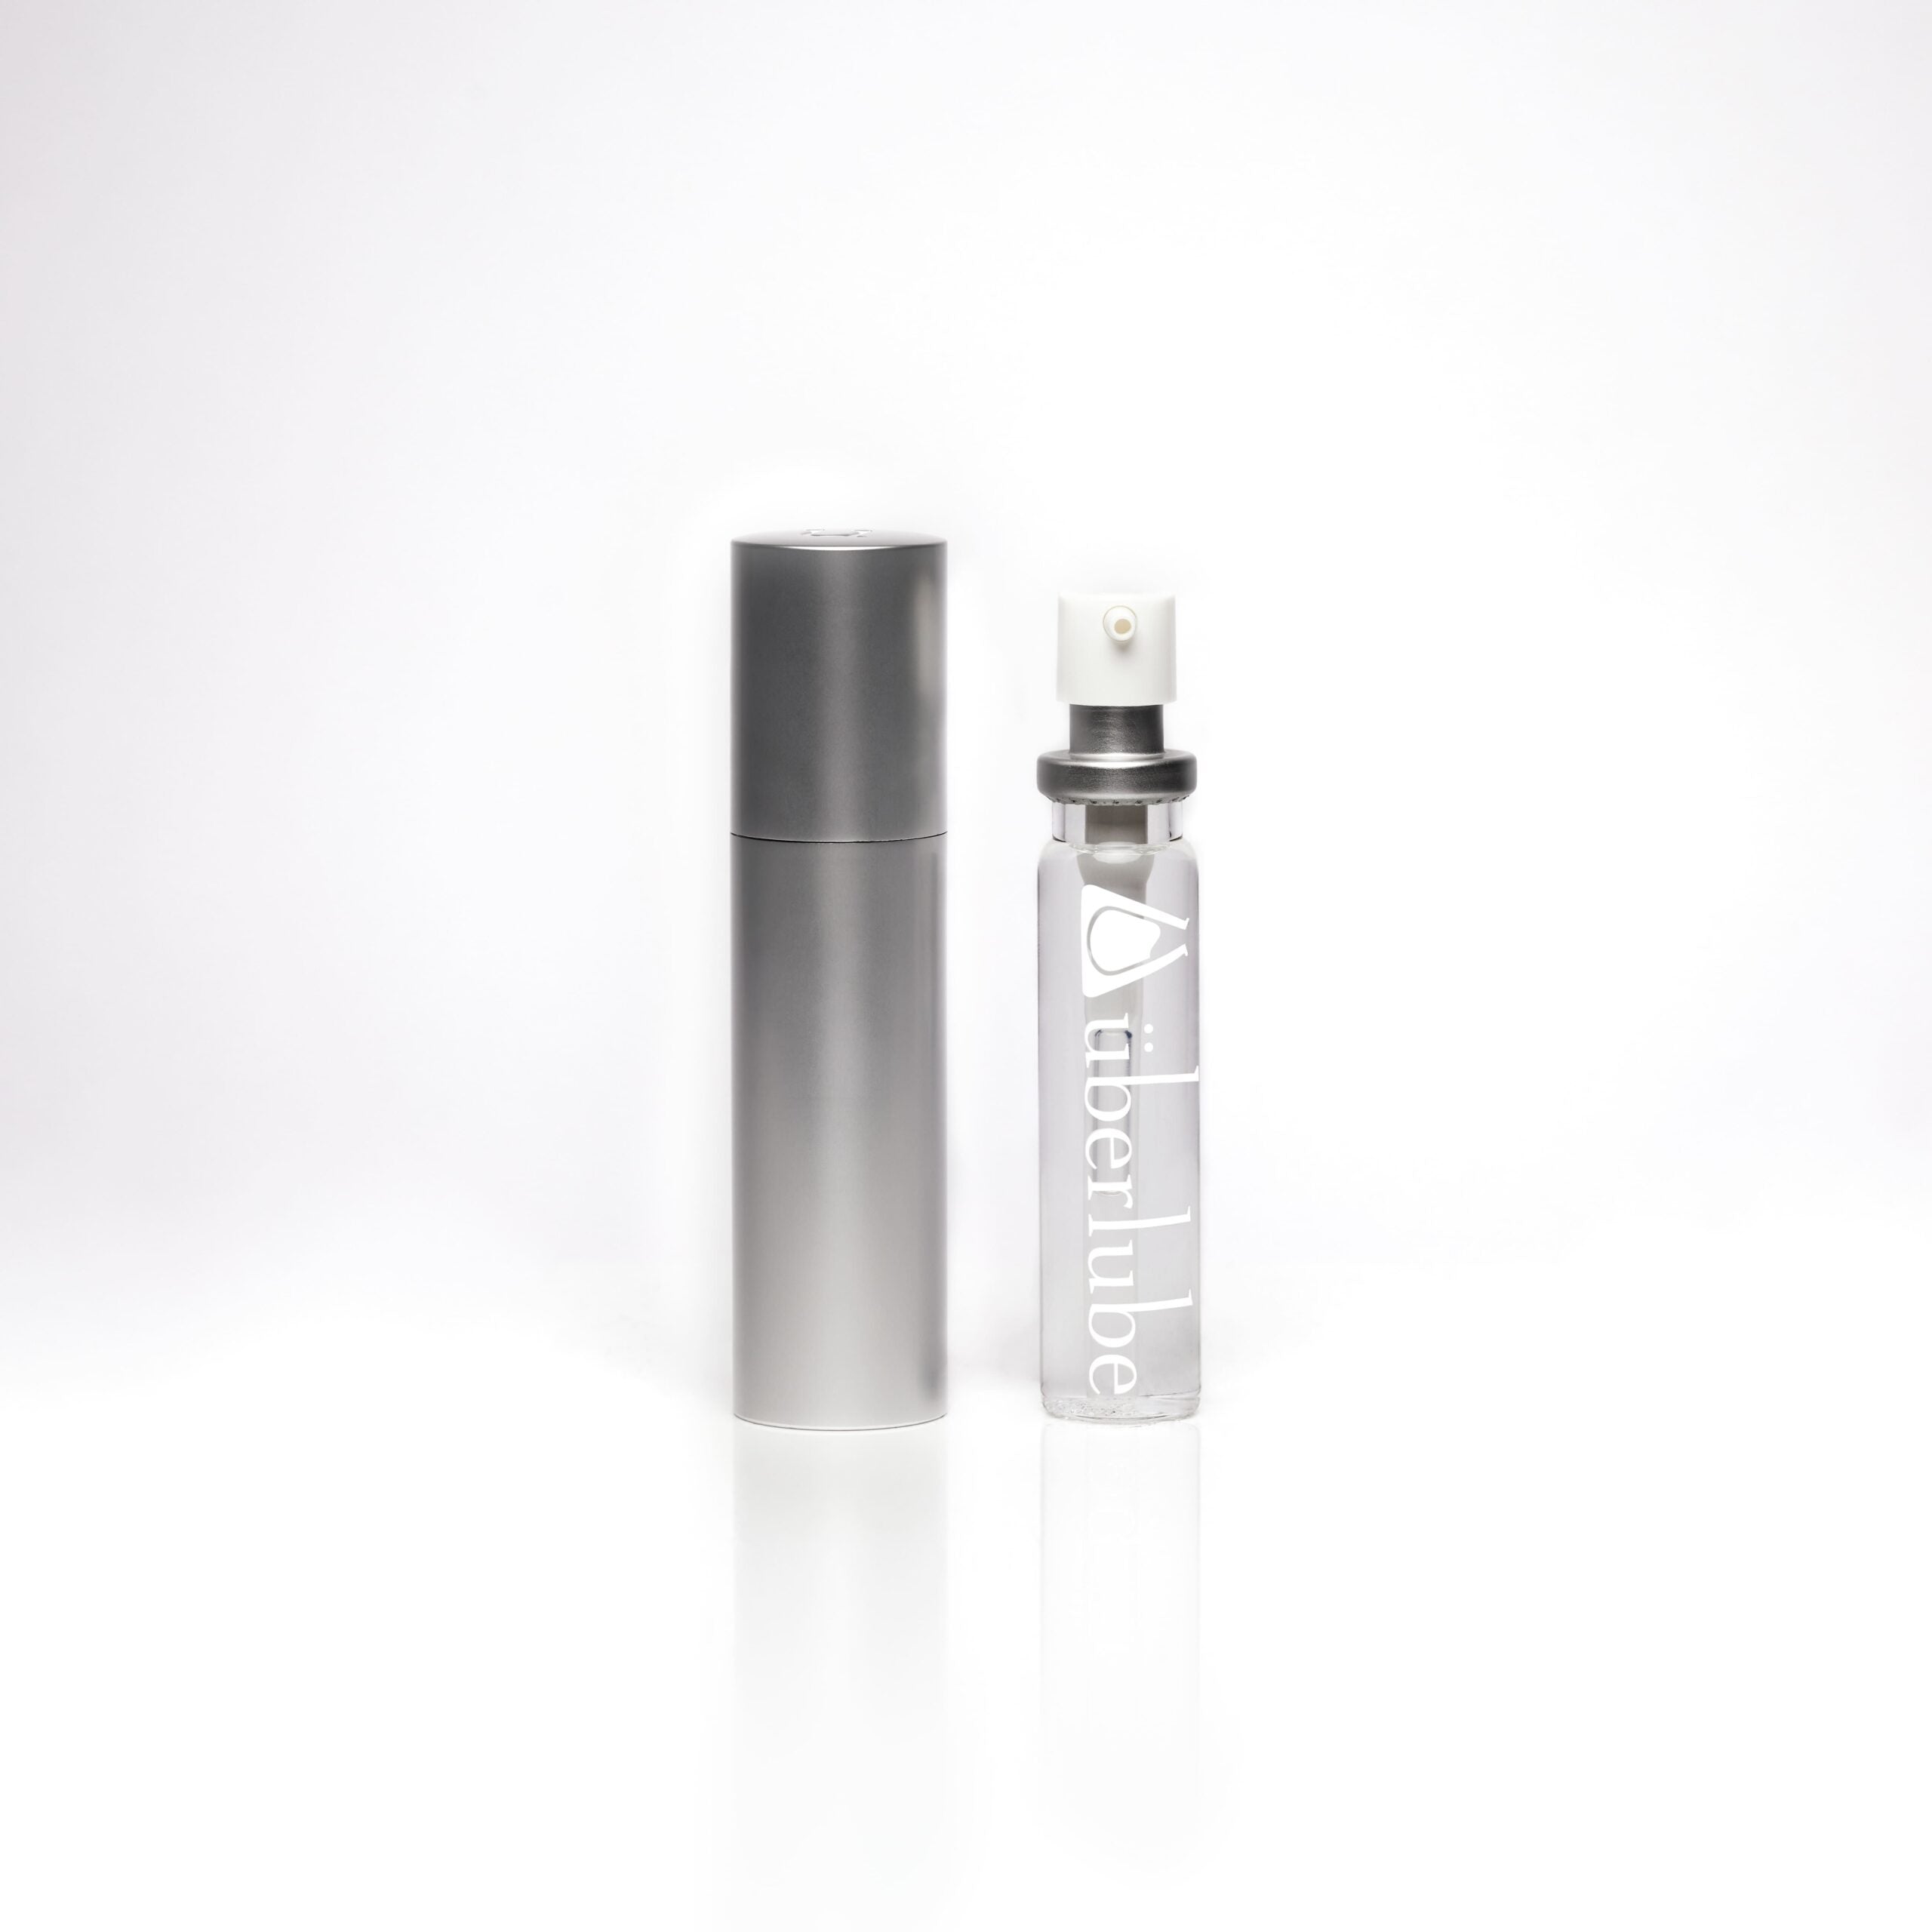 Uberlube Good-To-Go Traveller Silver - PL4YHOUSE - PL4YHOUSE - Uberlube Good-To-Go Traveller Silver - Uberlube - Lubricant - Uberlube Good-To-Go Traveller Silver - {{ sex }} - {{adult_toys}} - {{UK}} - {{ christmas }}